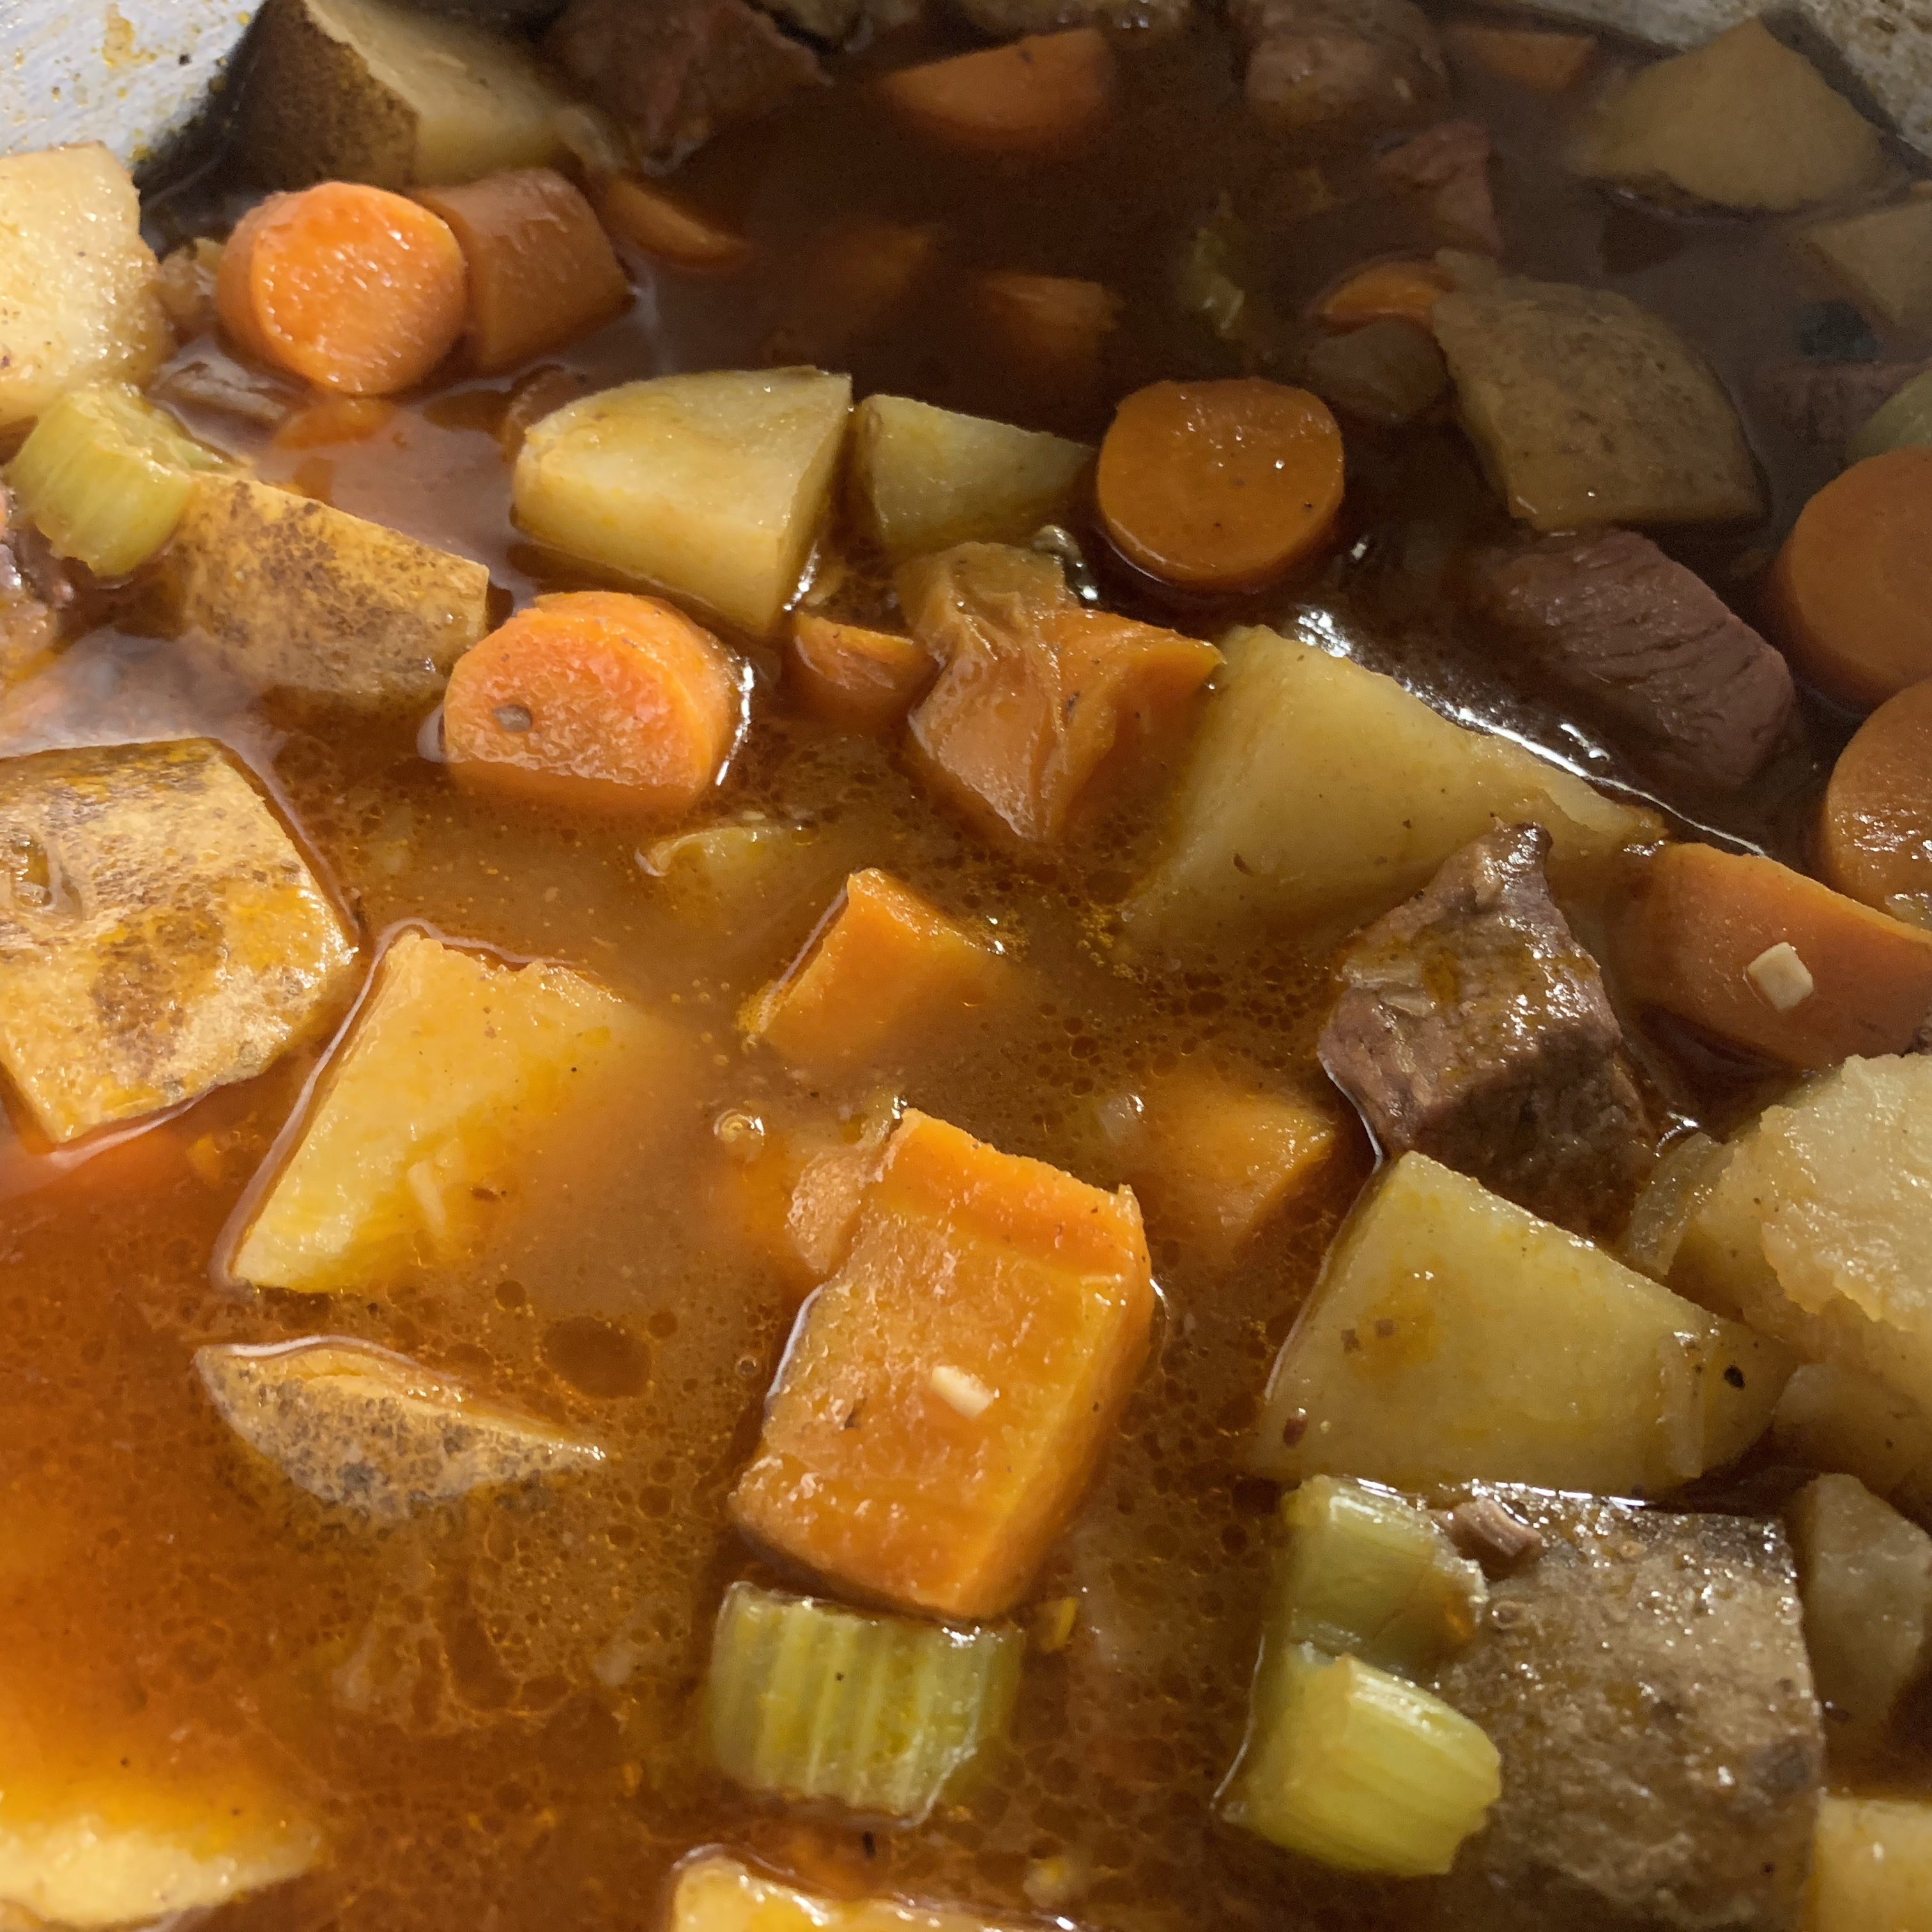 Roasted Vegetable and Beef Stew